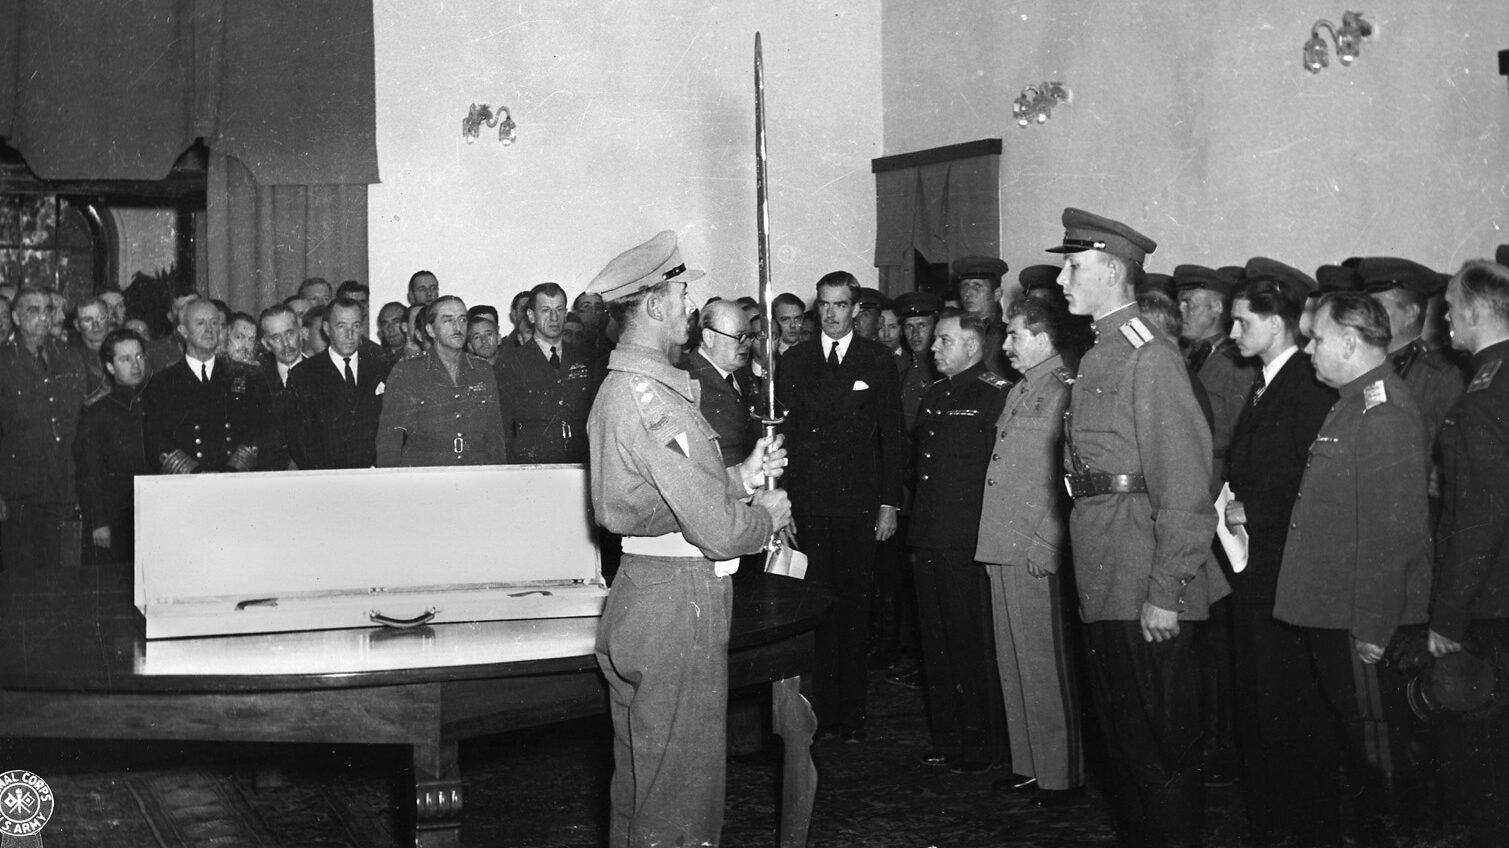 During a ceremony at the Soviet embassy in Tehran, Josef Stalin is presented the Sword of Stalingrad by the British delegation to the Big Three conference. Prime Minister Winston Churchill is visible to the left of the sword.